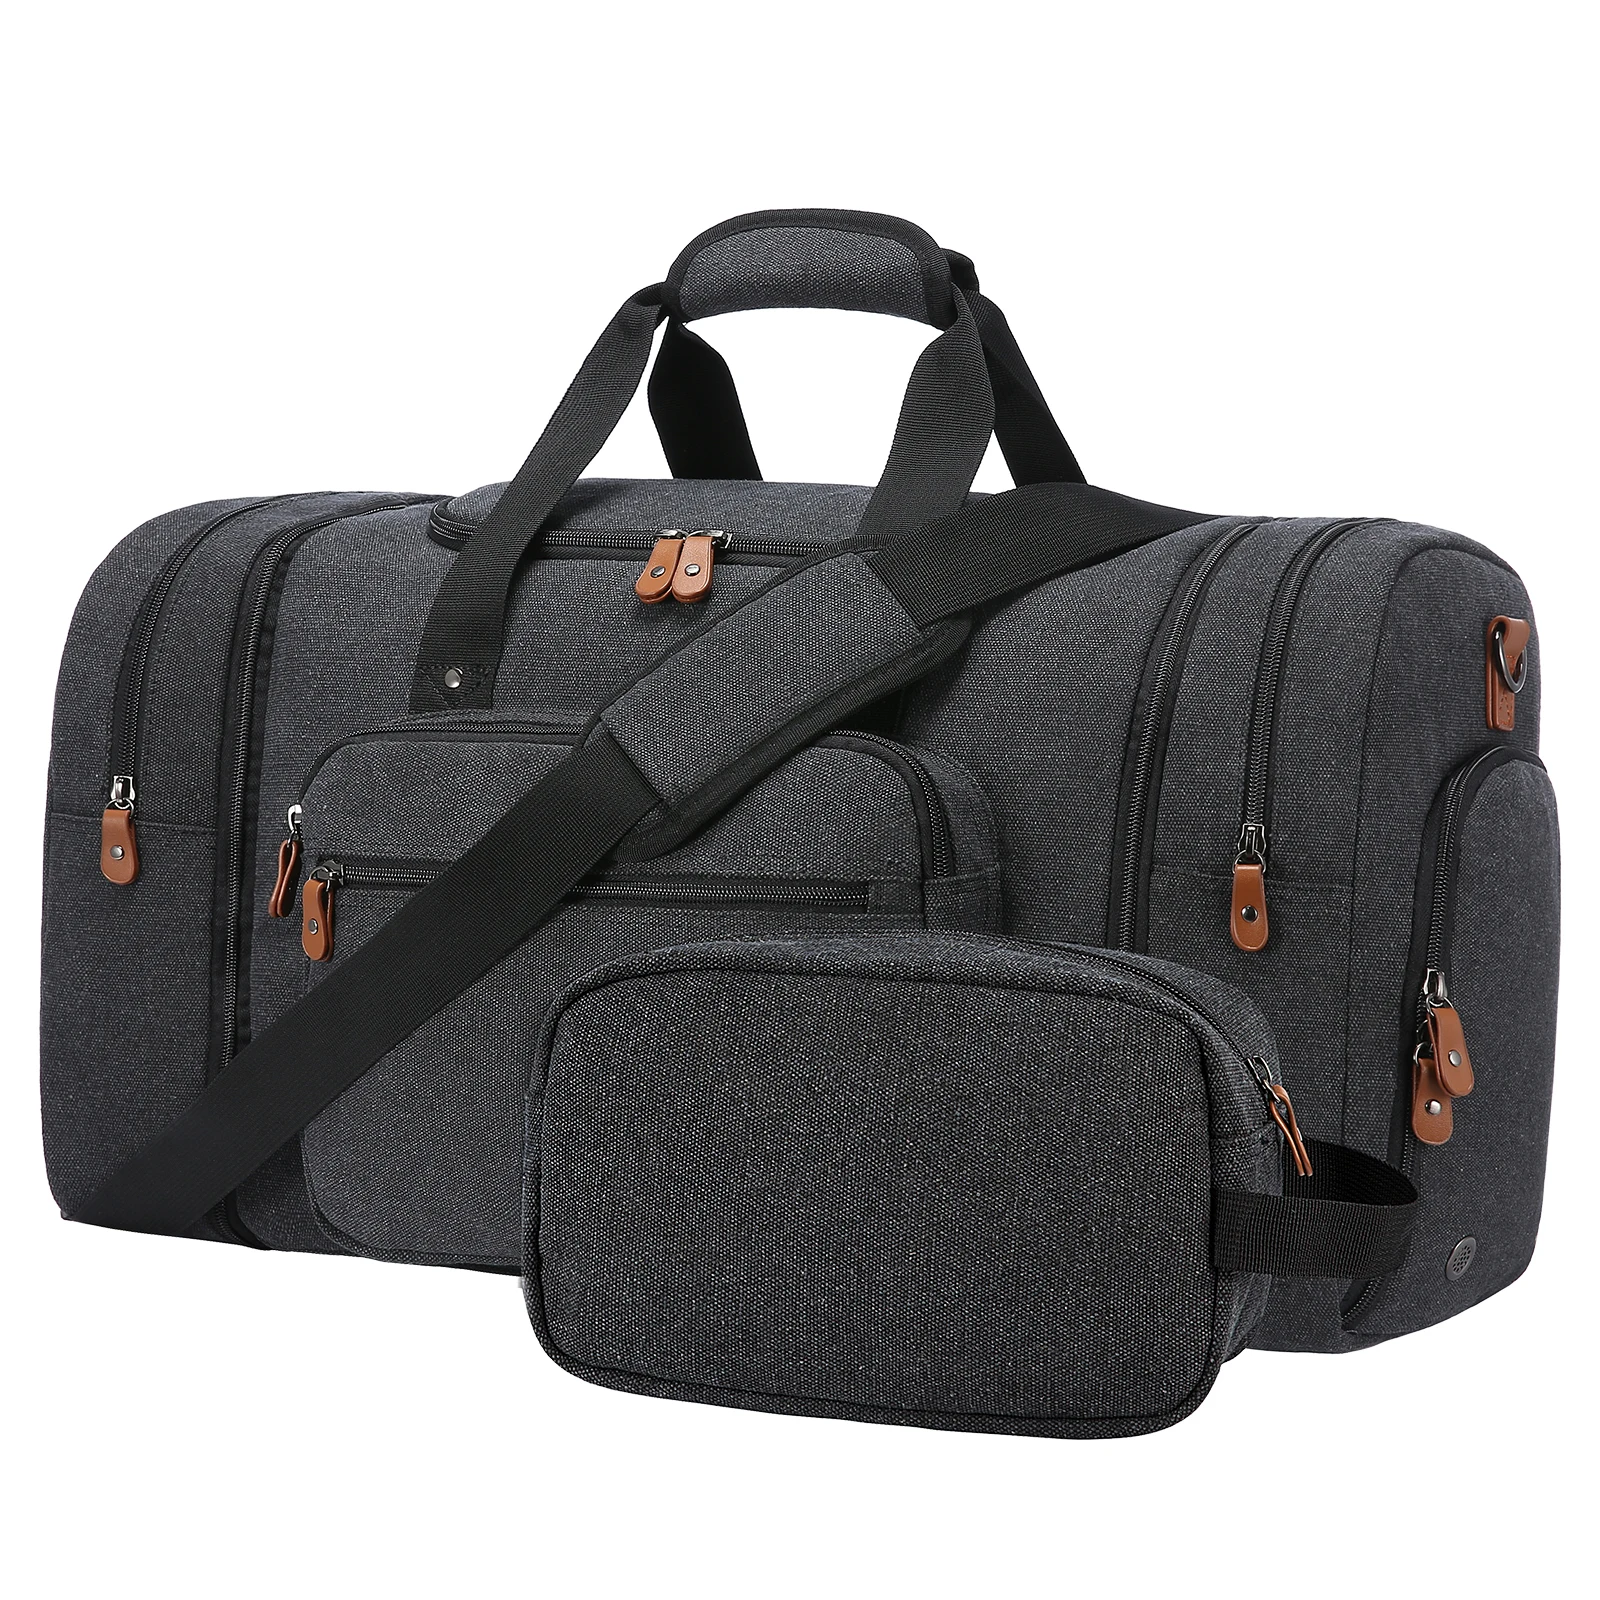 

2021 Luggage Bag Men Women Clothes Storage Carry-On Duffle Organiser Foldable Duffel bag Packable Collapsible Tote Travel Bag